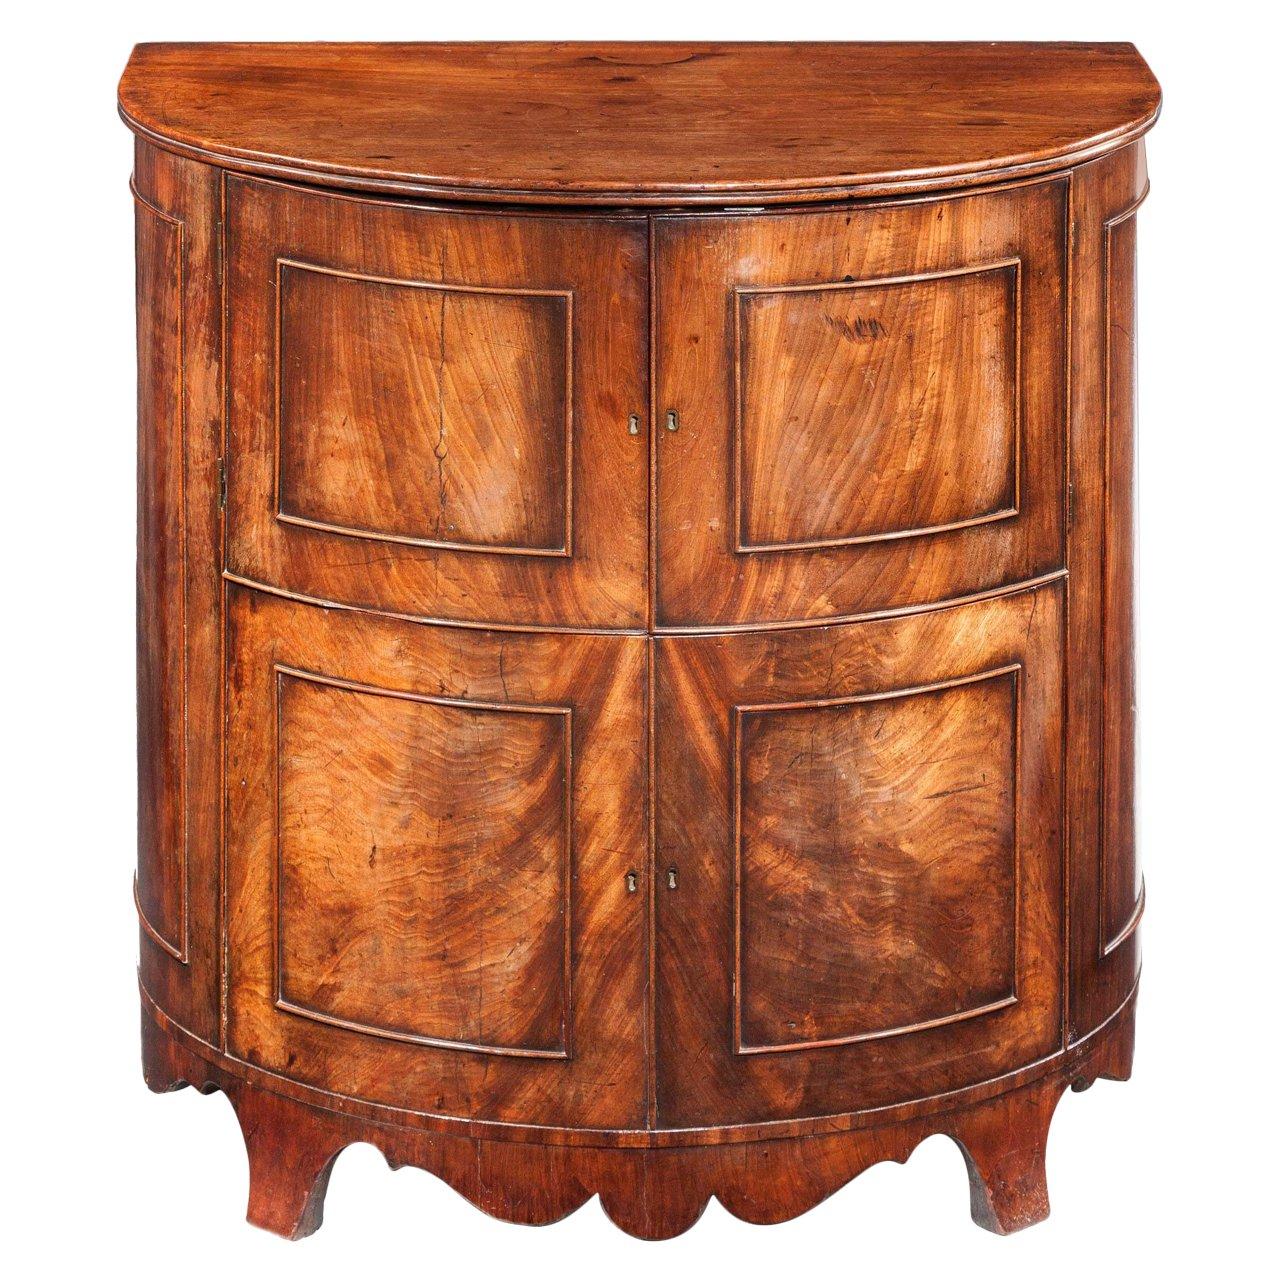 Early 19th Century Bow-Front Commode